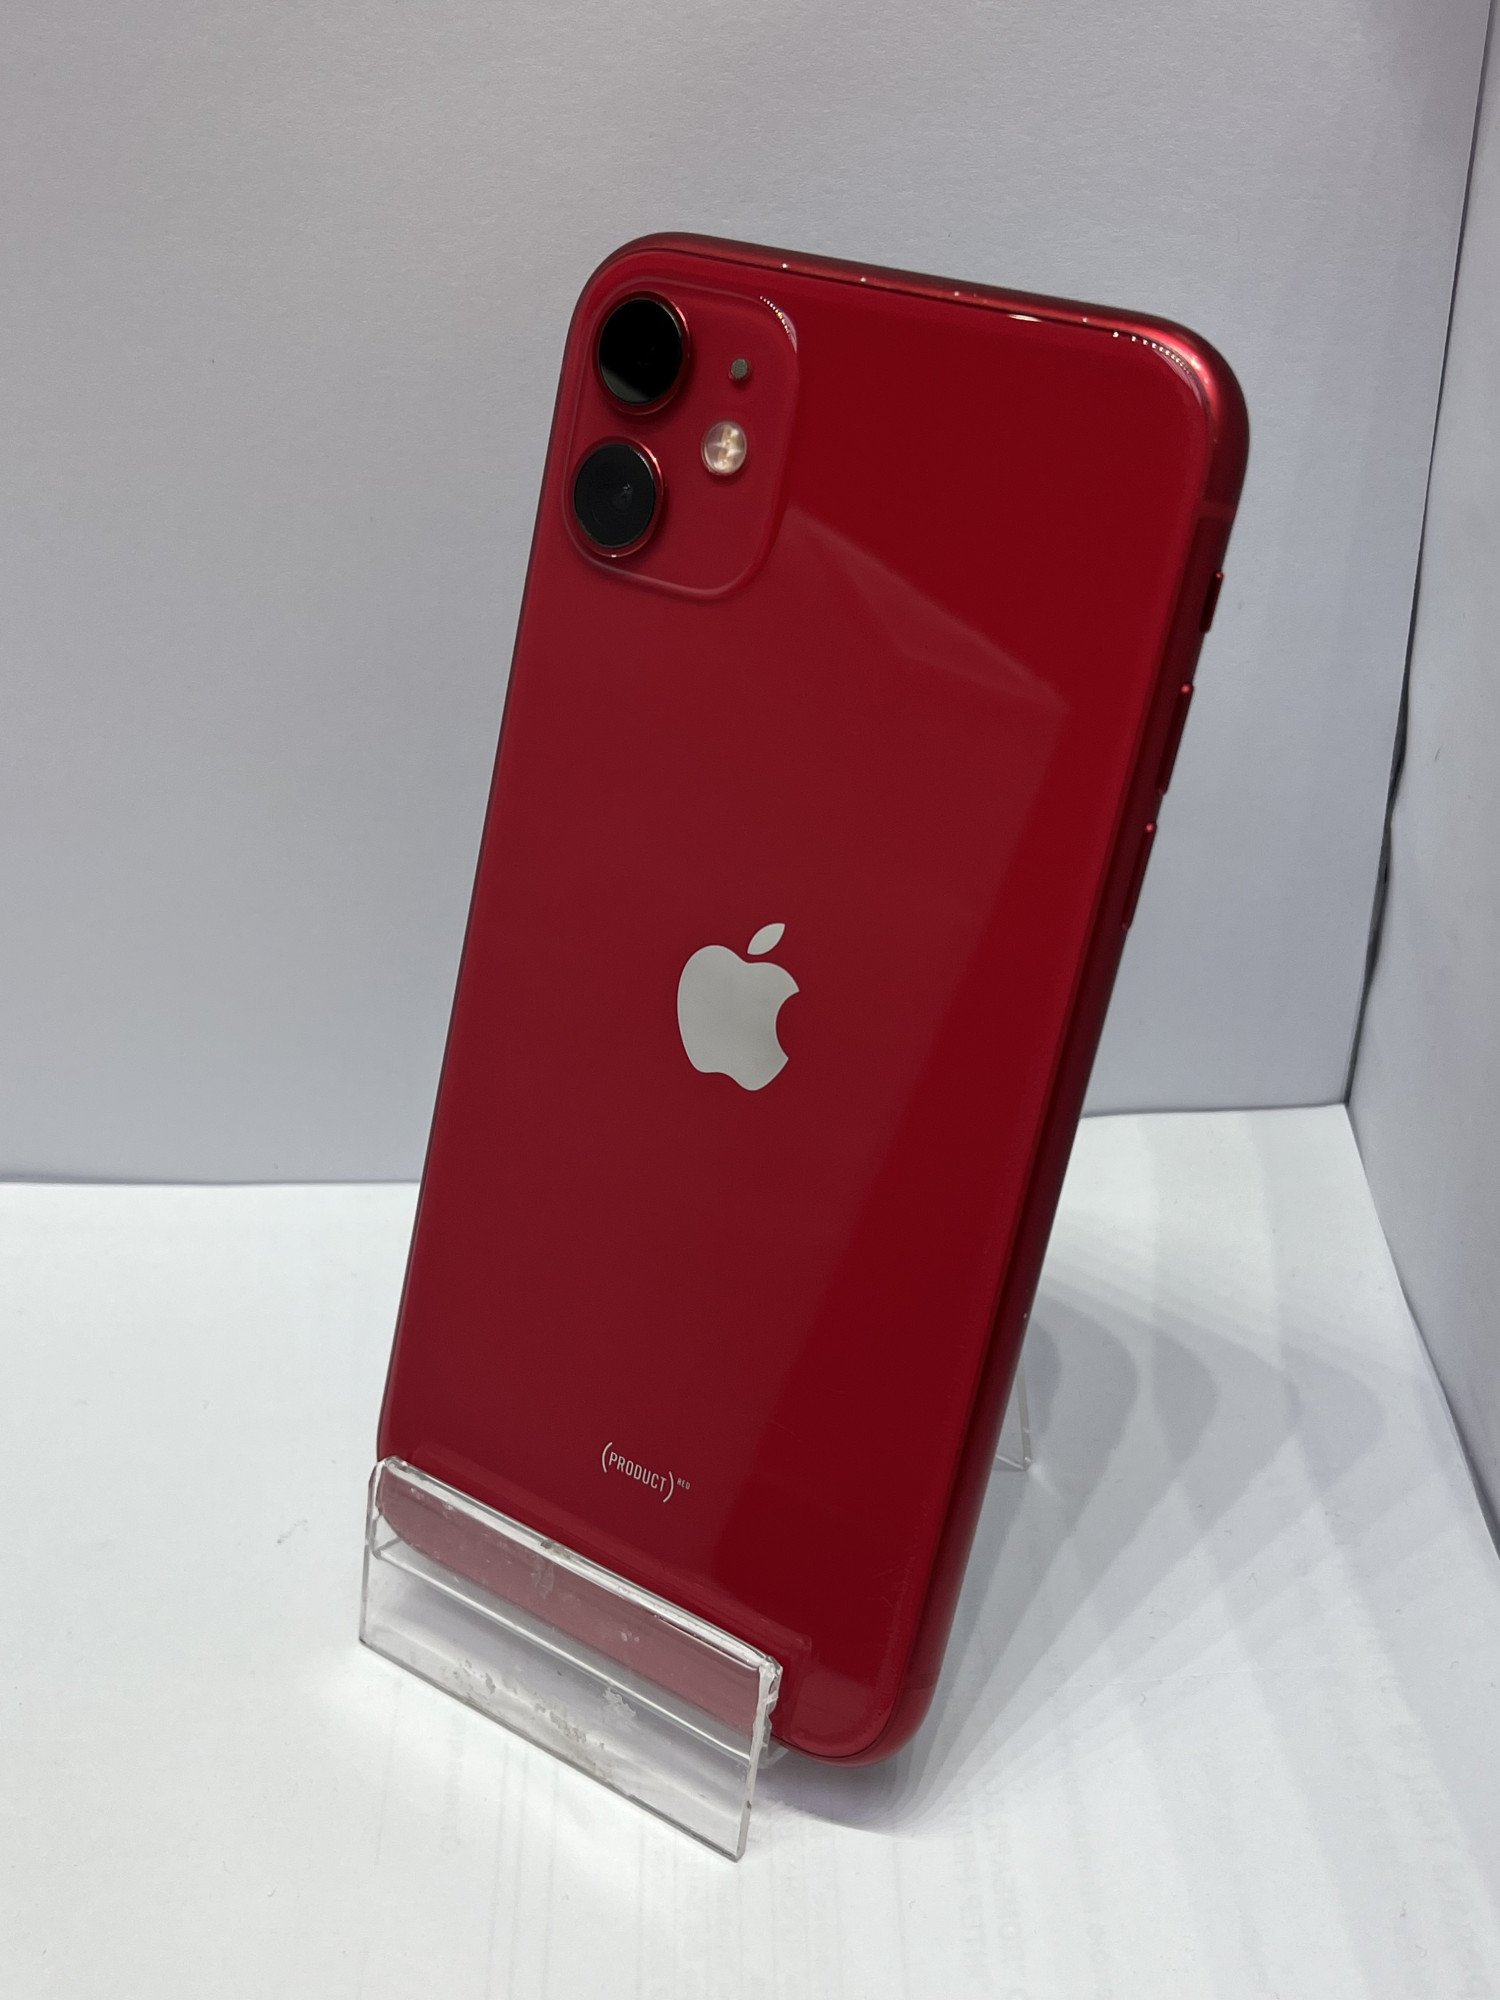 Apple iPhone 11 128GB Product Red (MWLG2) 1